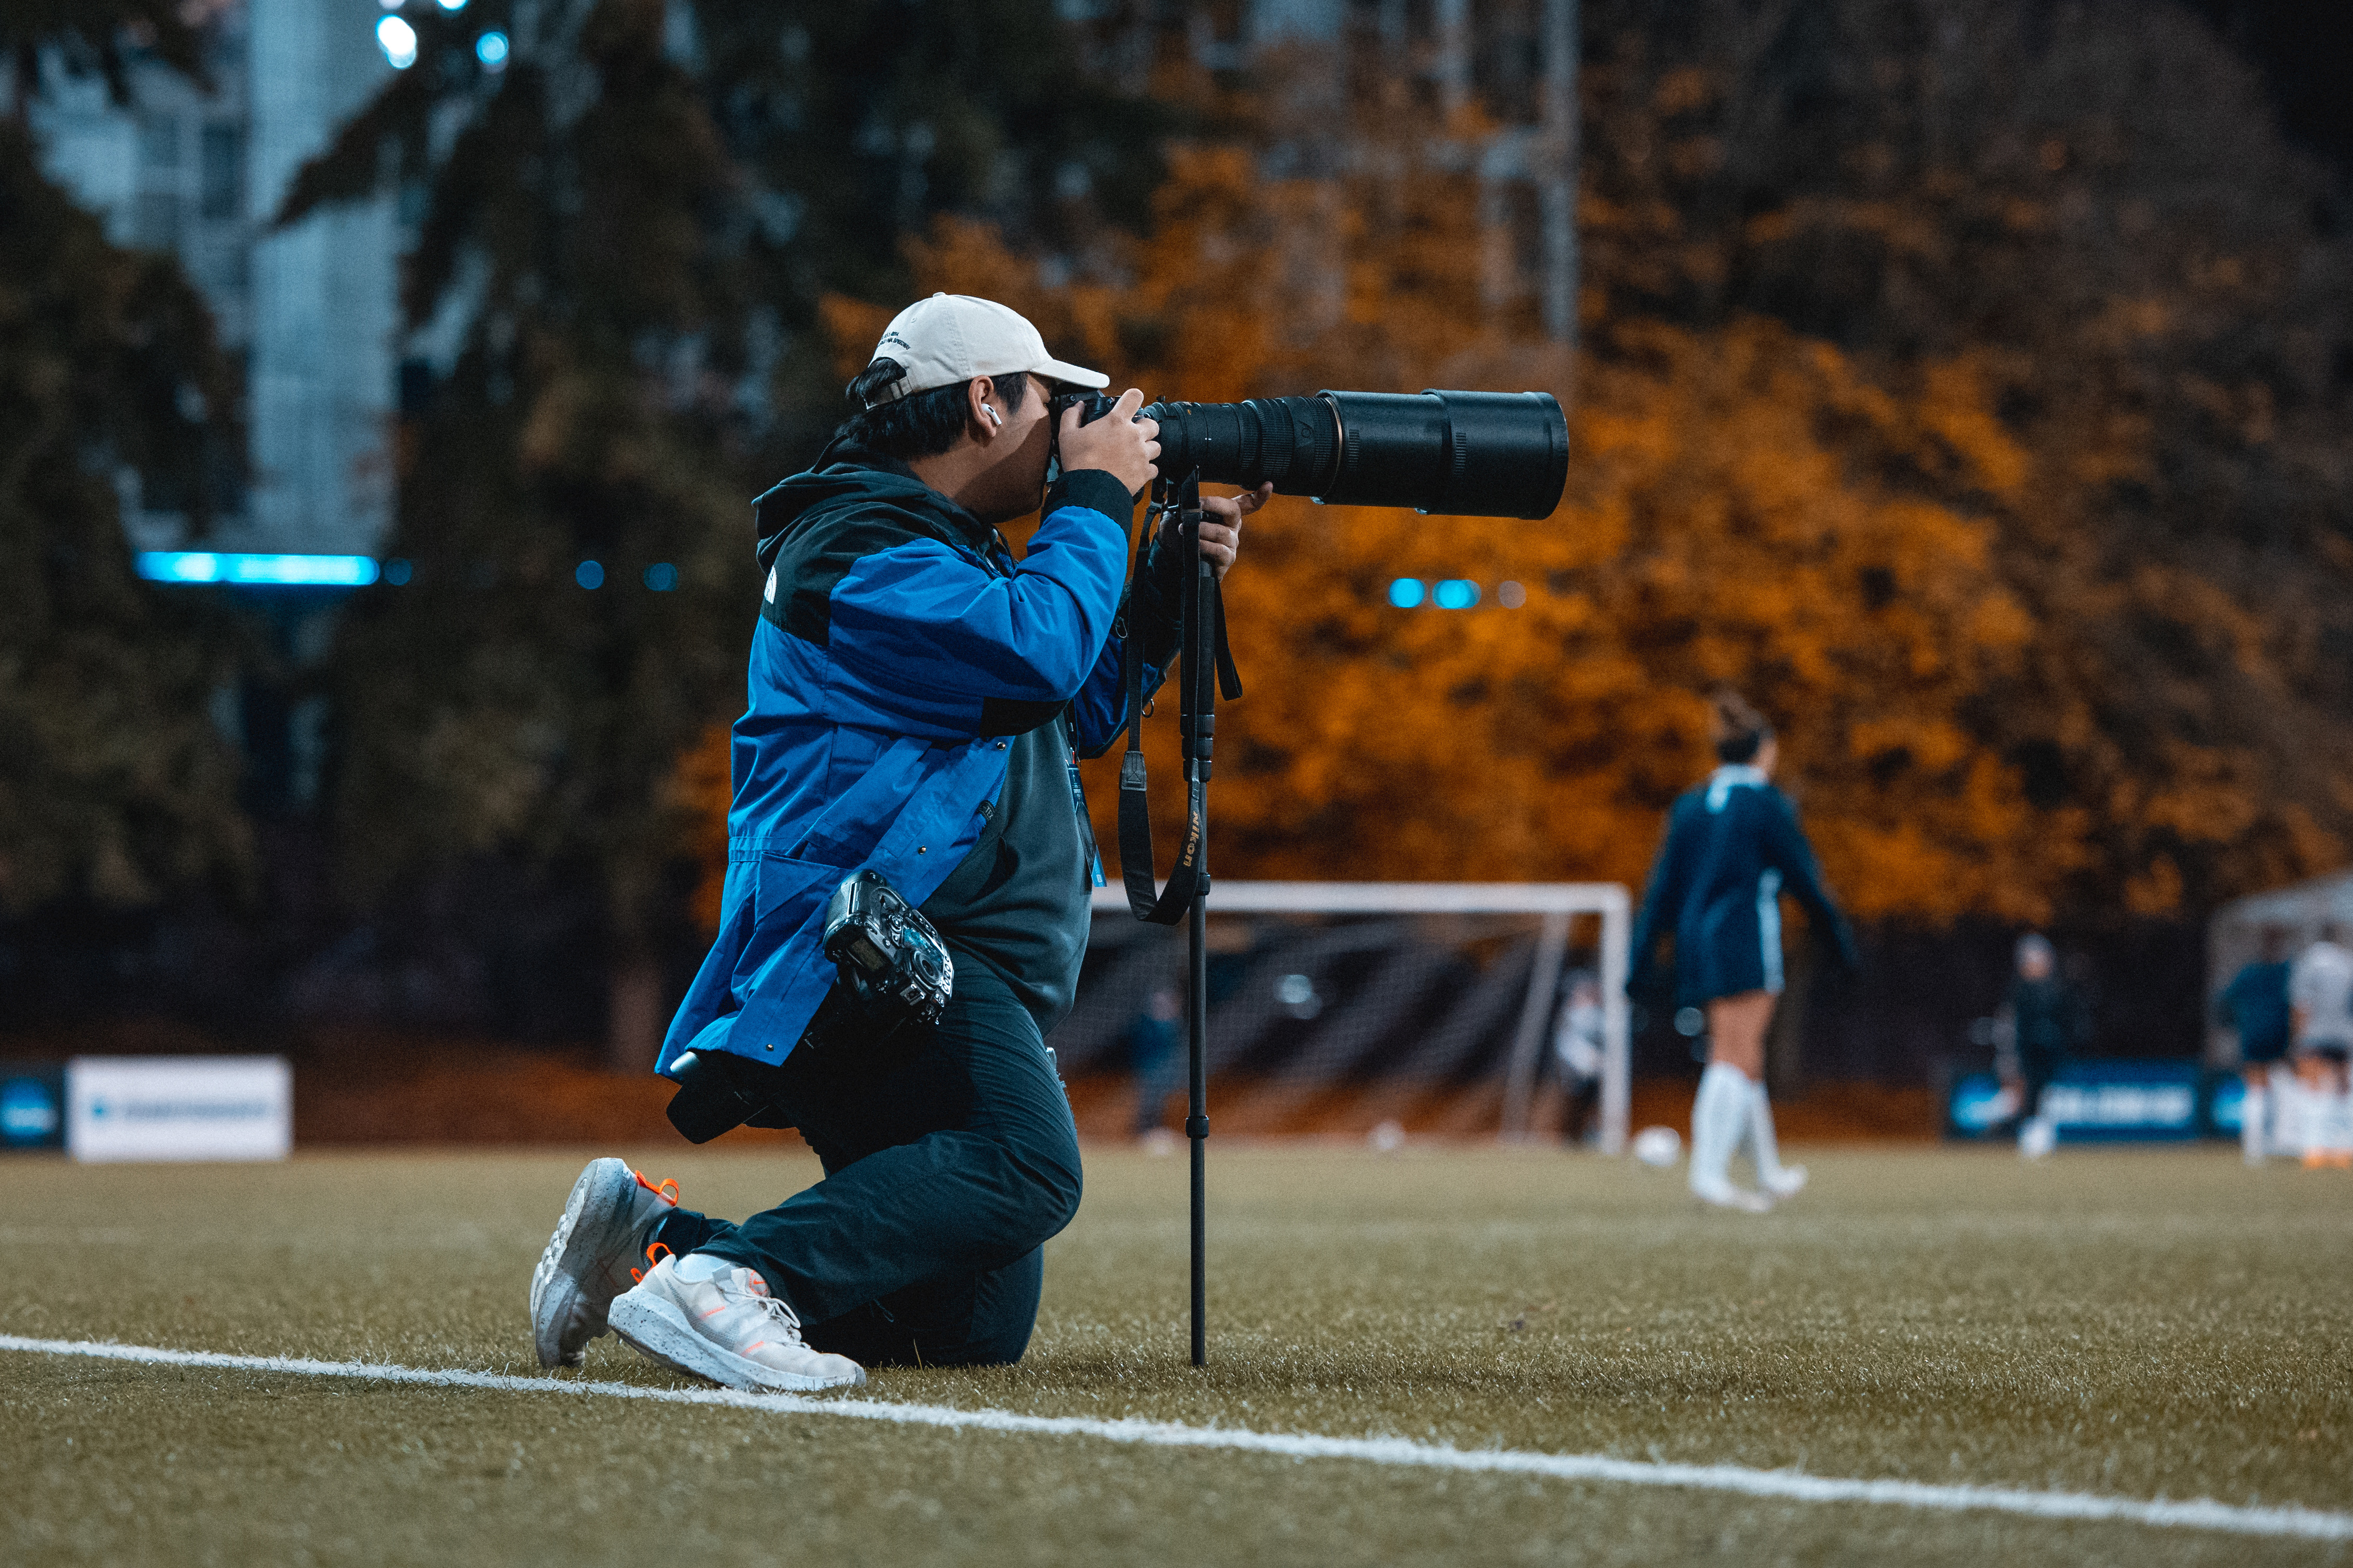 Eric Becker kneels on the sidelines as he photographs the action with a long lens.